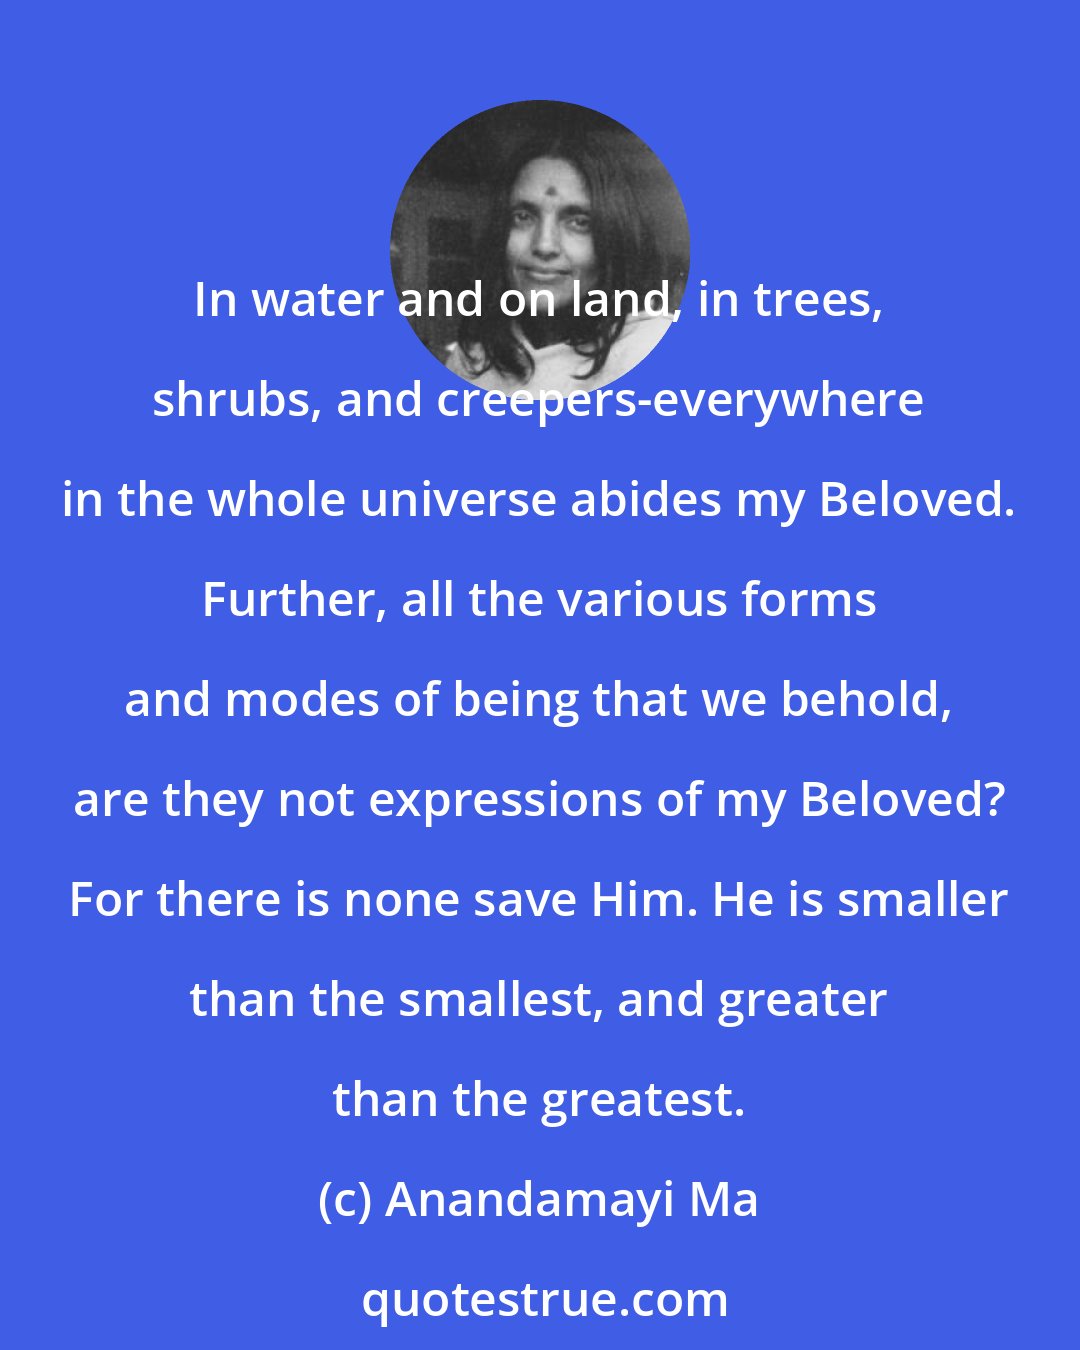 Anandamayi Ma: In water and on land, in trees, shrubs, and creepers-everywhere in the whole universe abides my Beloved. Further, all the various forms and modes of being that we behold, are they not expressions of my Beloved? For there is none save Him. He is smaller than the smallest, and greater than the greatest.